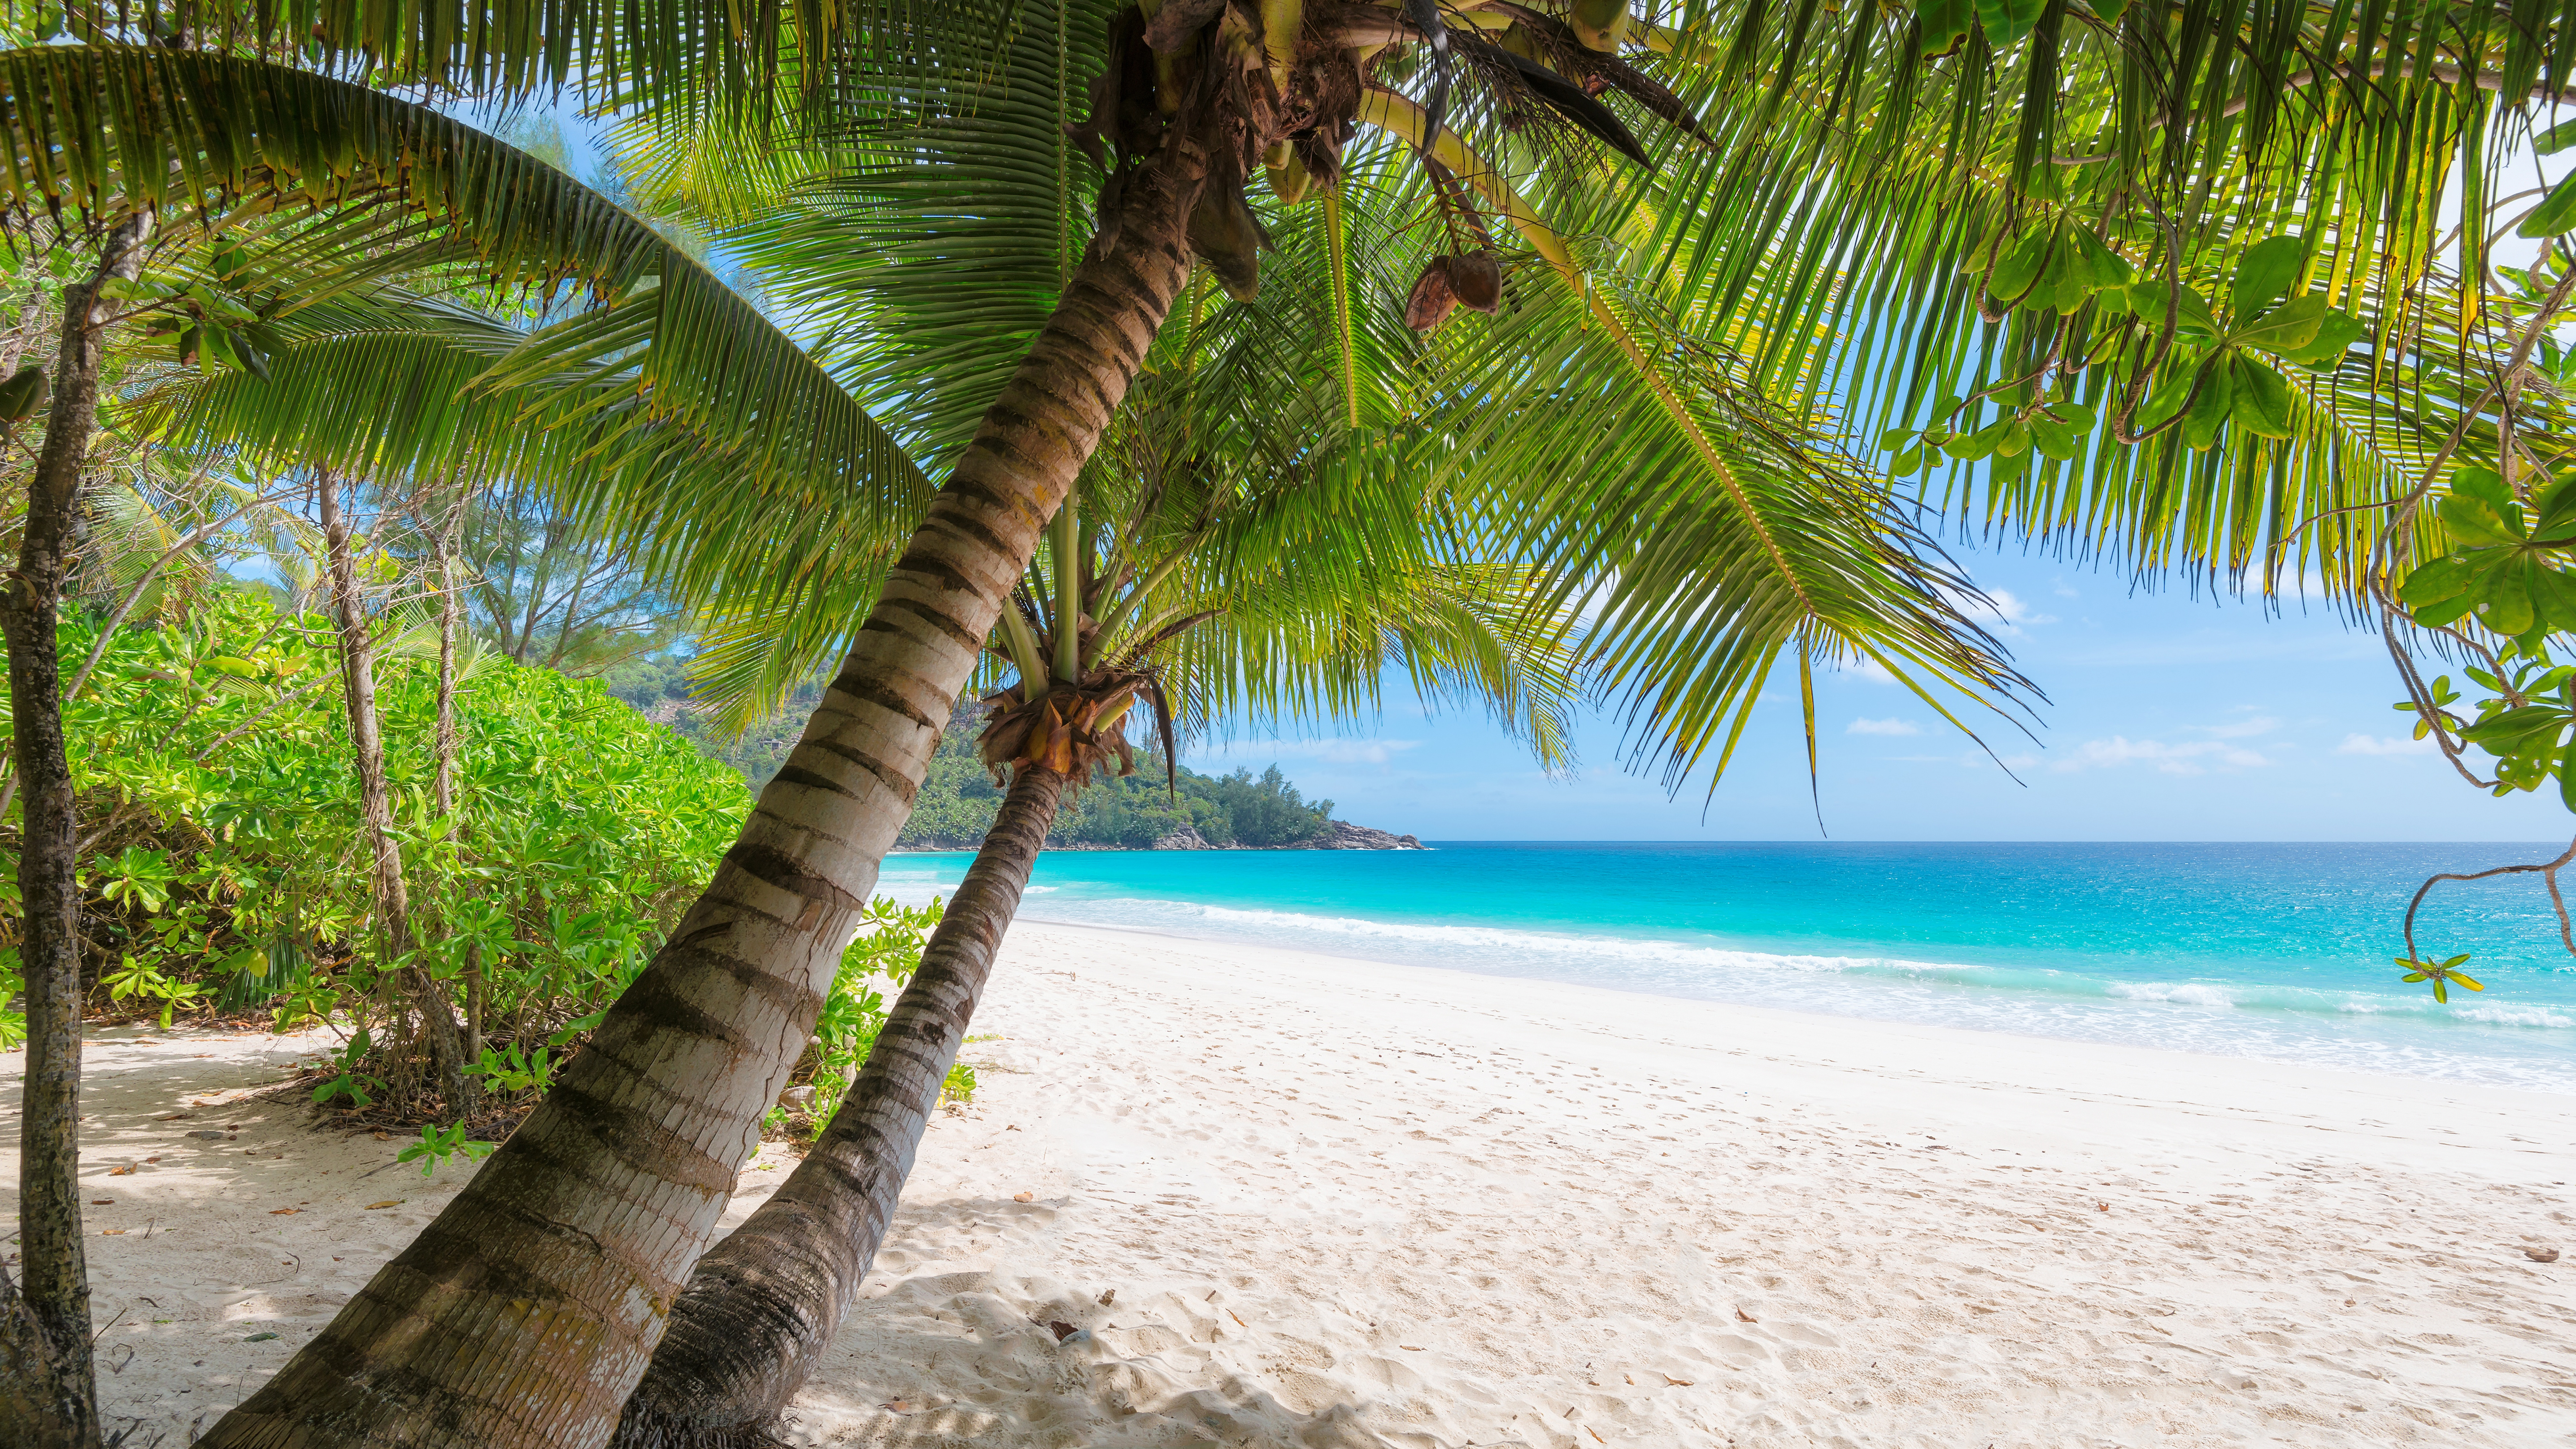 Coconut Tree on White Sand Beach During Daytime. Wallpaper in 7680x4320 Resolution